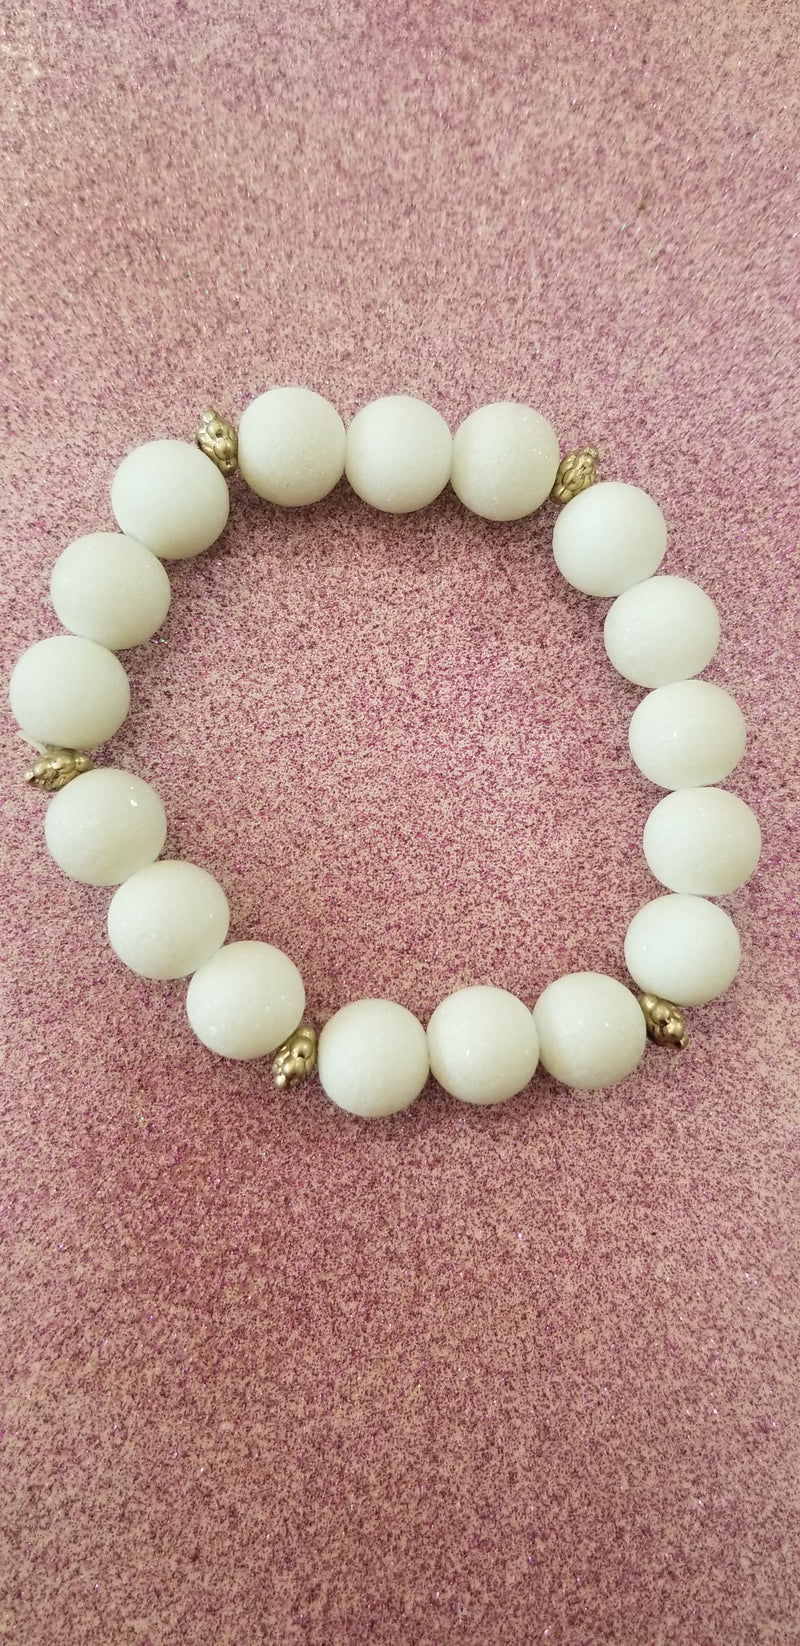 Sparkly White and Gold Bracelet